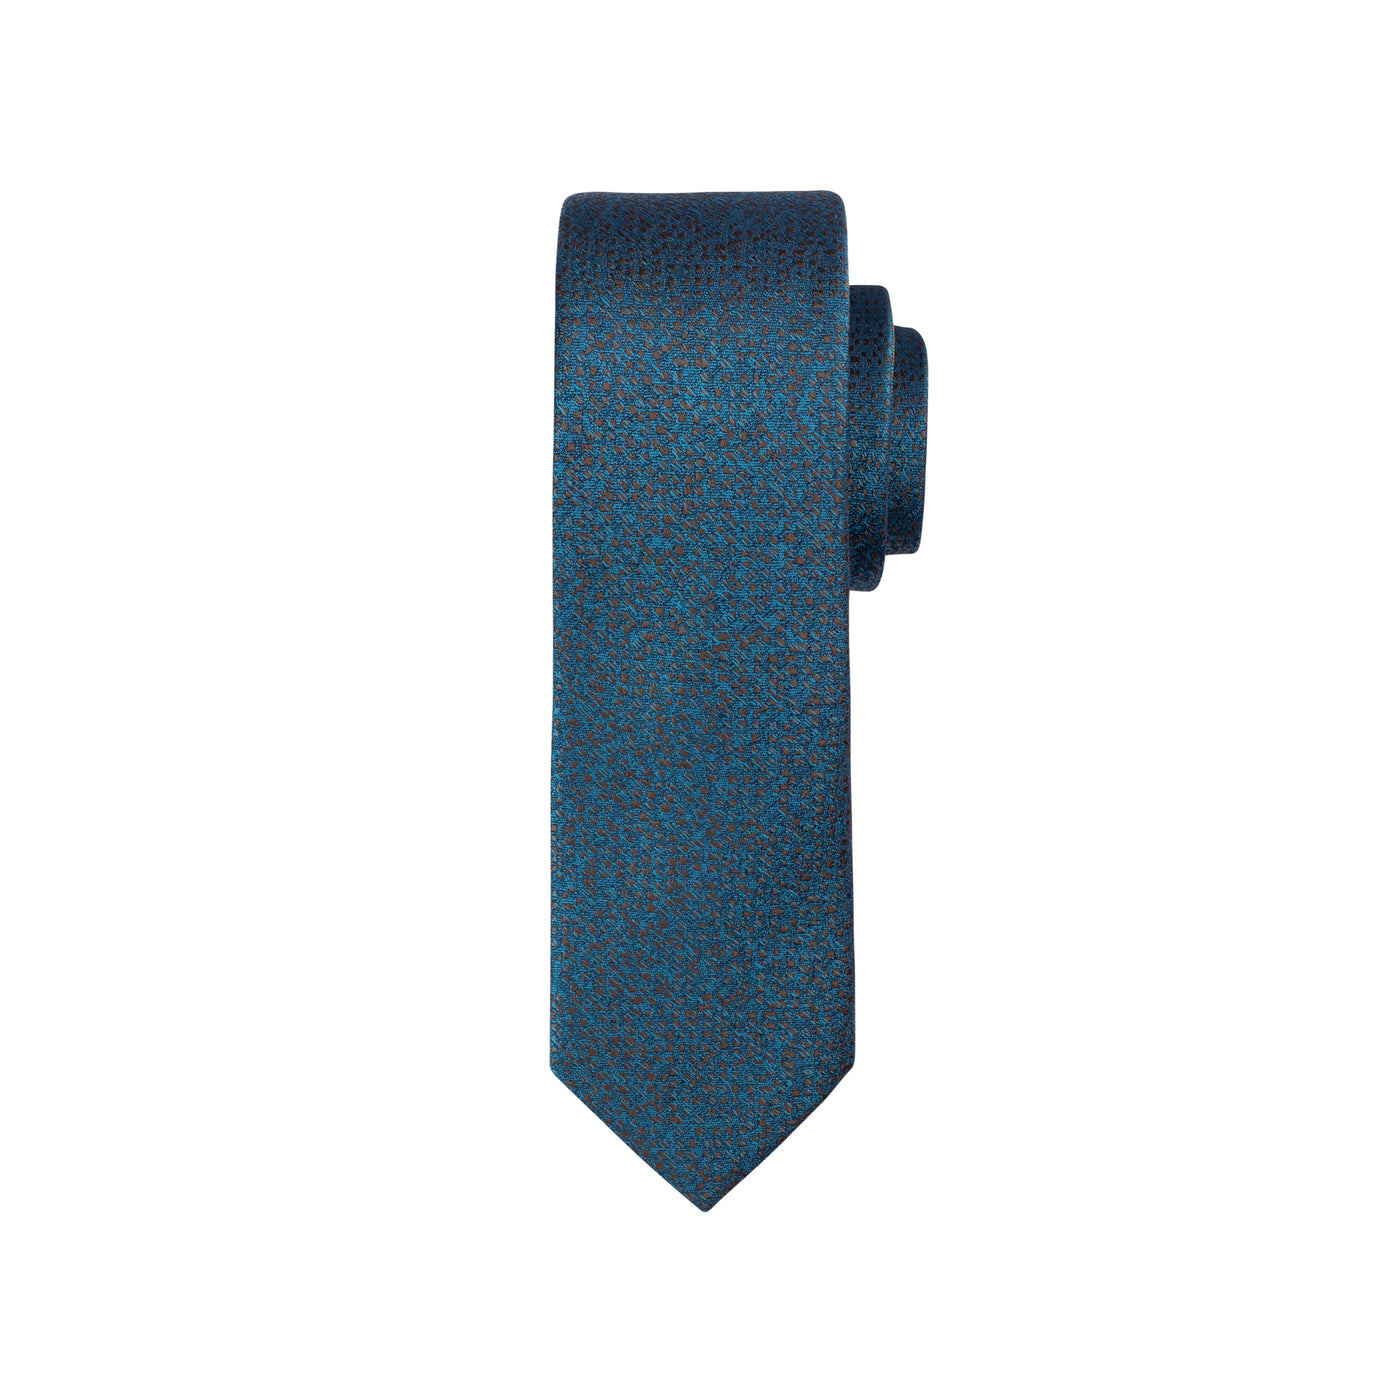 T.O. Boys Texture Tie in Spruce